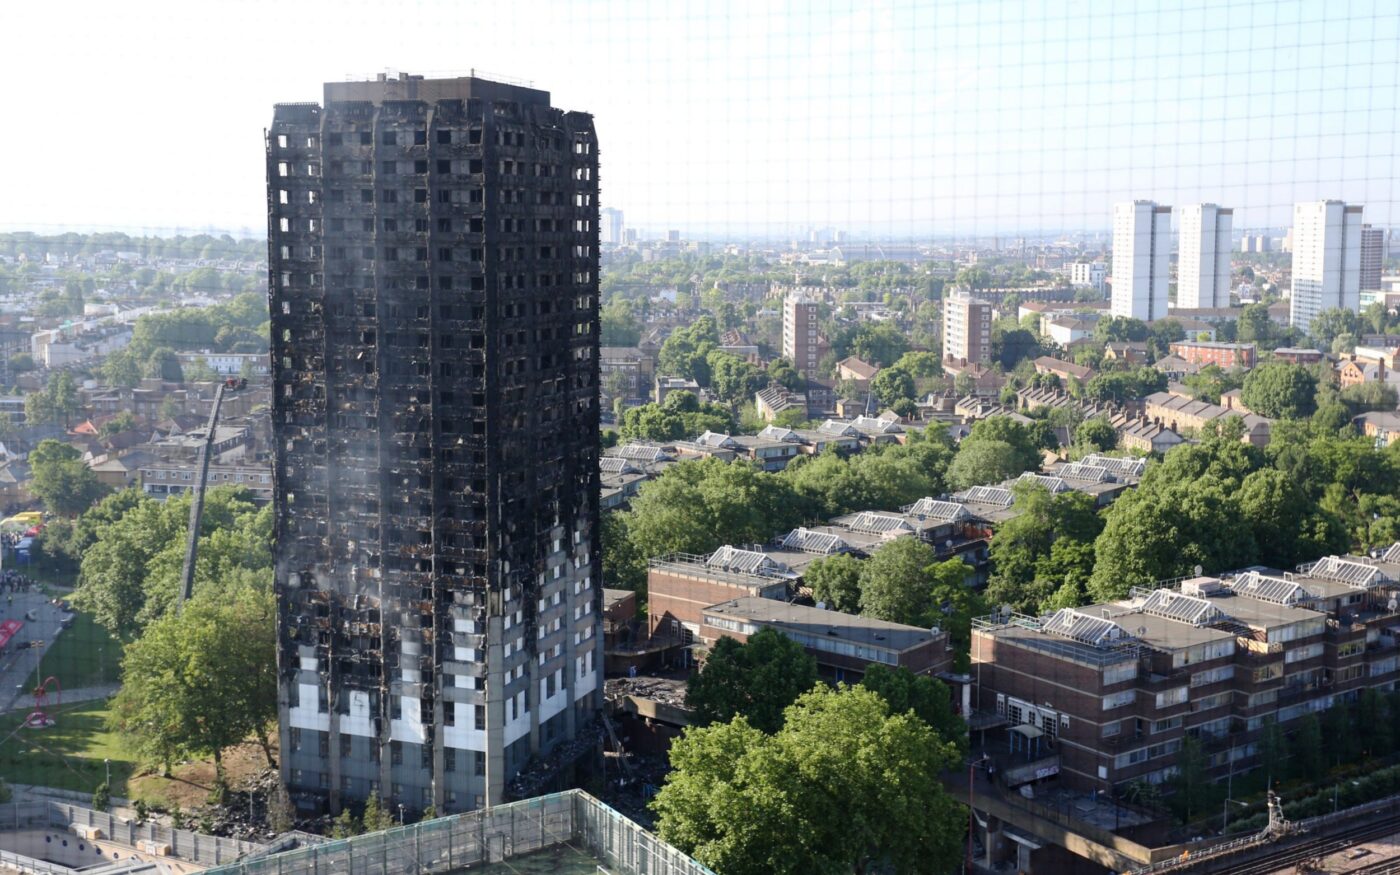 Grenfell: Between Test and Reality